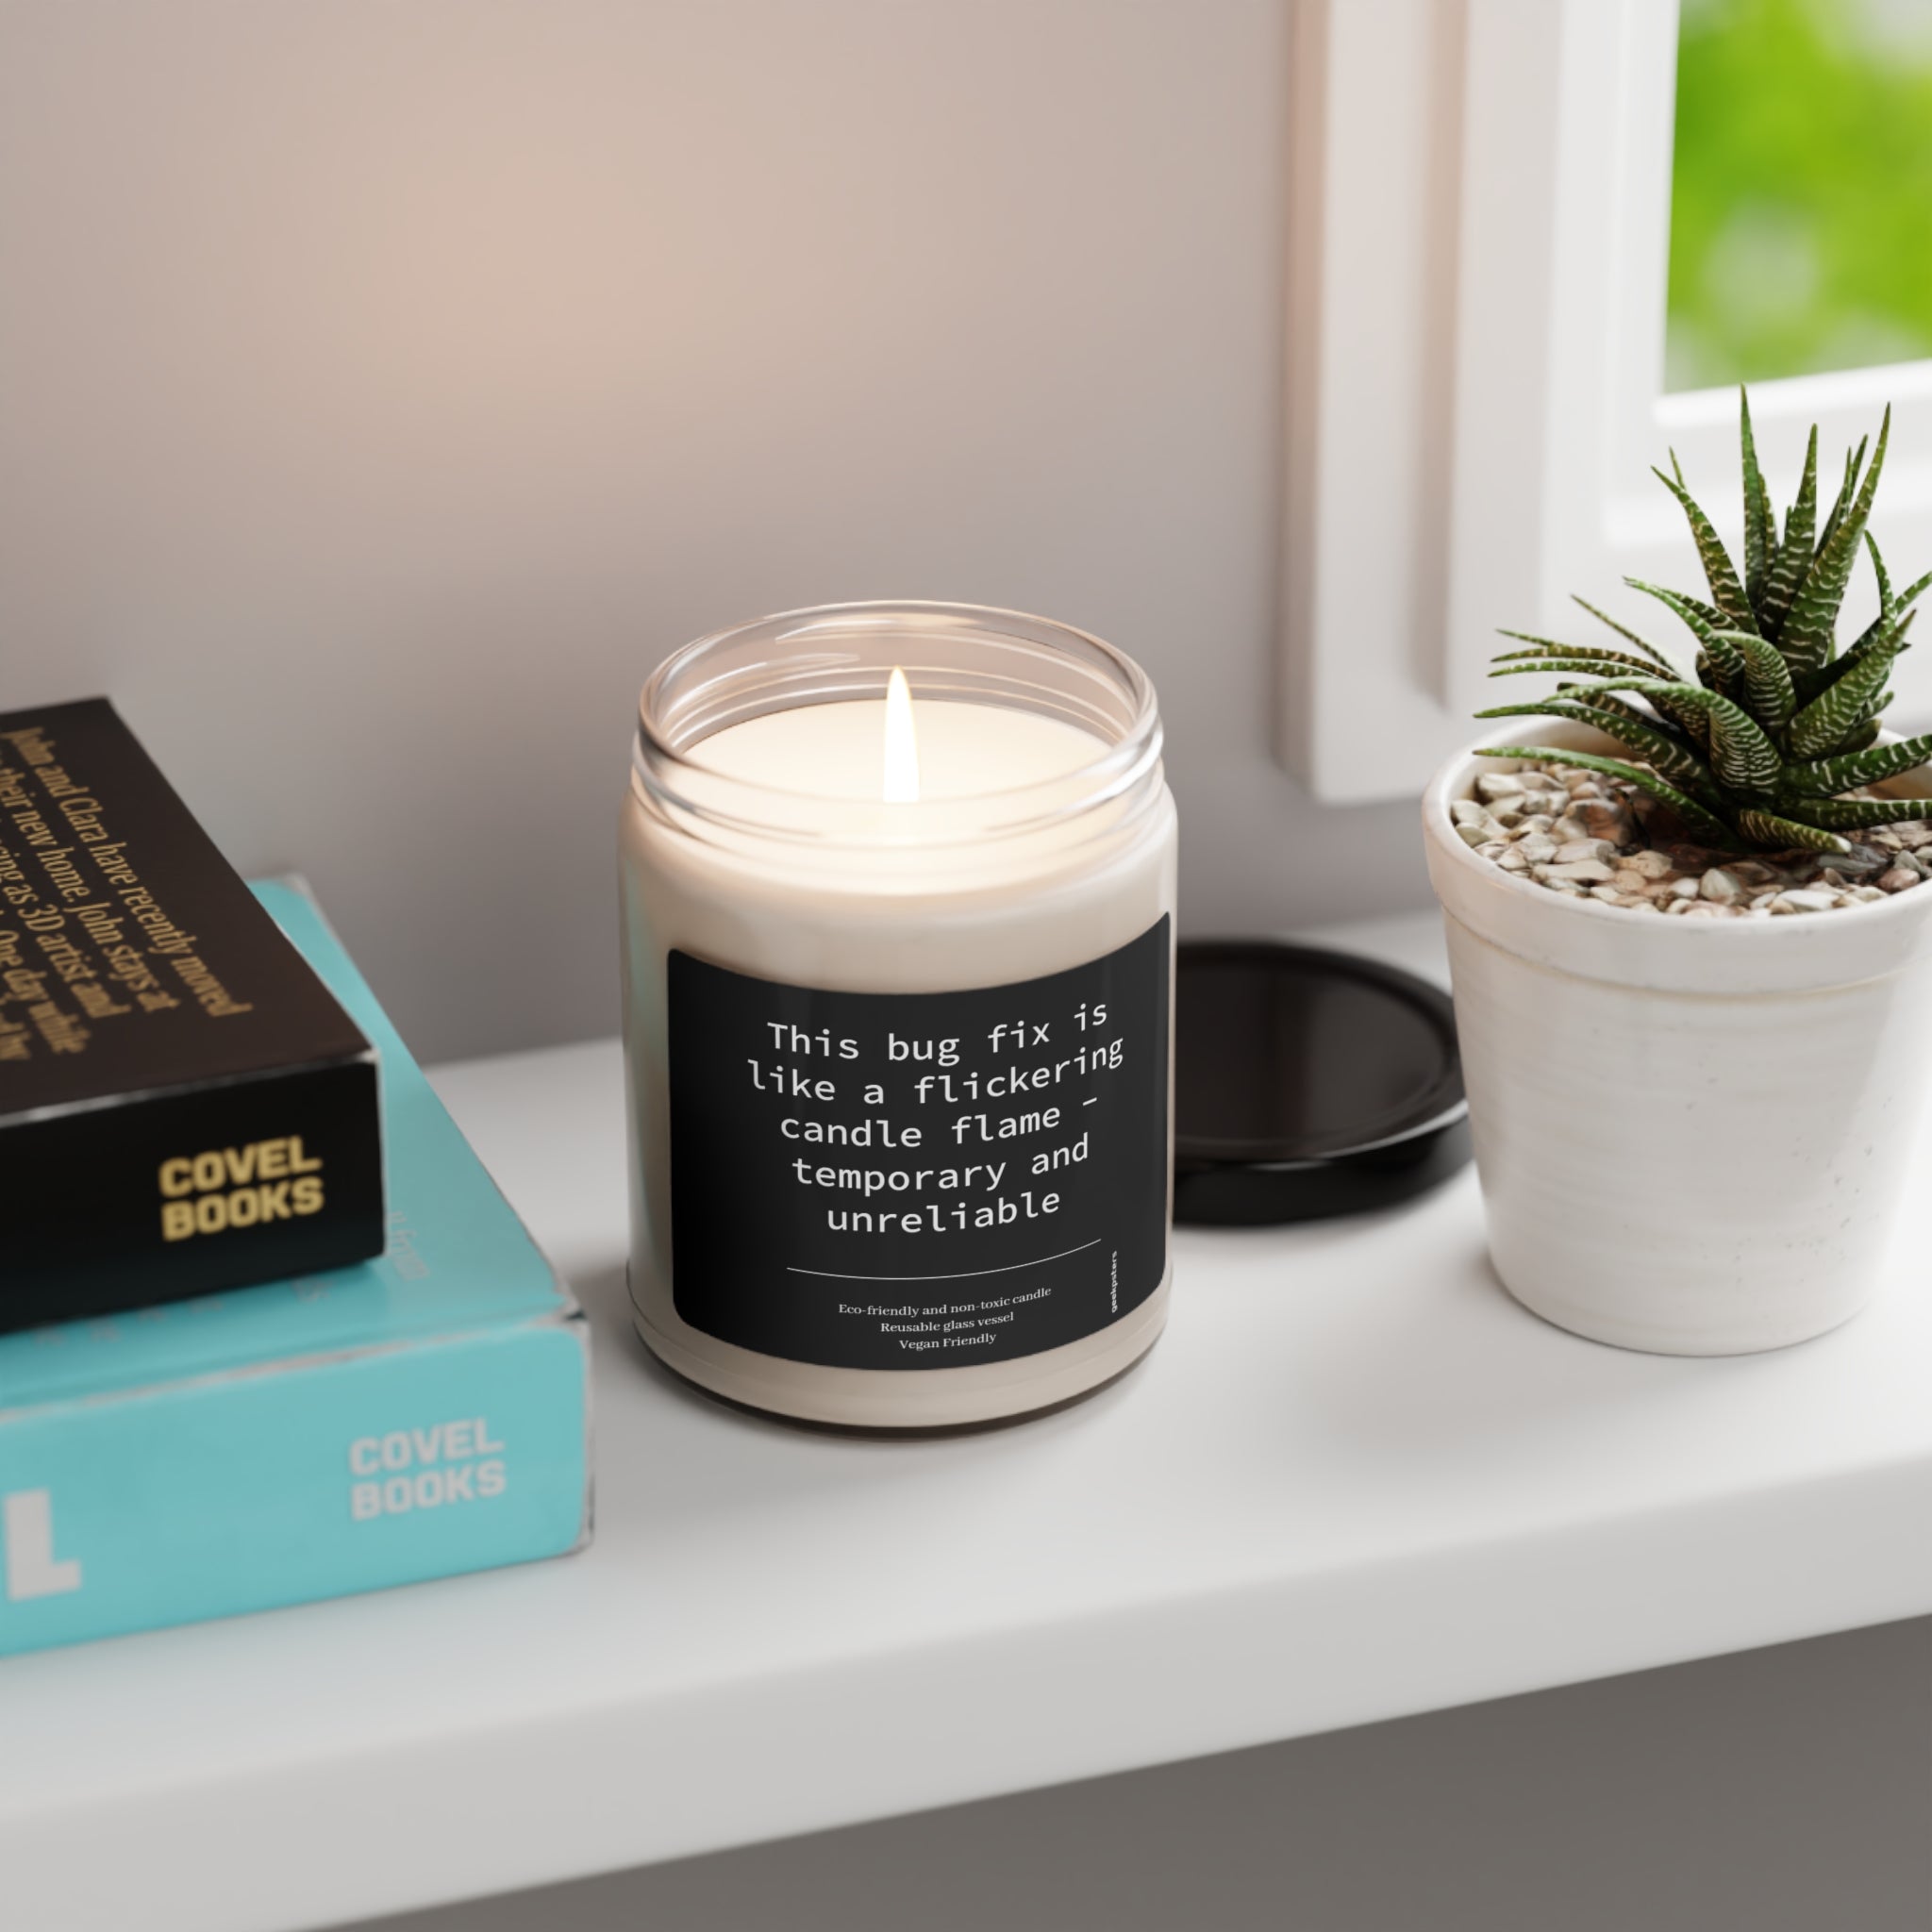 A This Bug Fix is Like a Flame scented candle with humorous labeling sits on a windowsill beside a small potted plant and a stack of books.